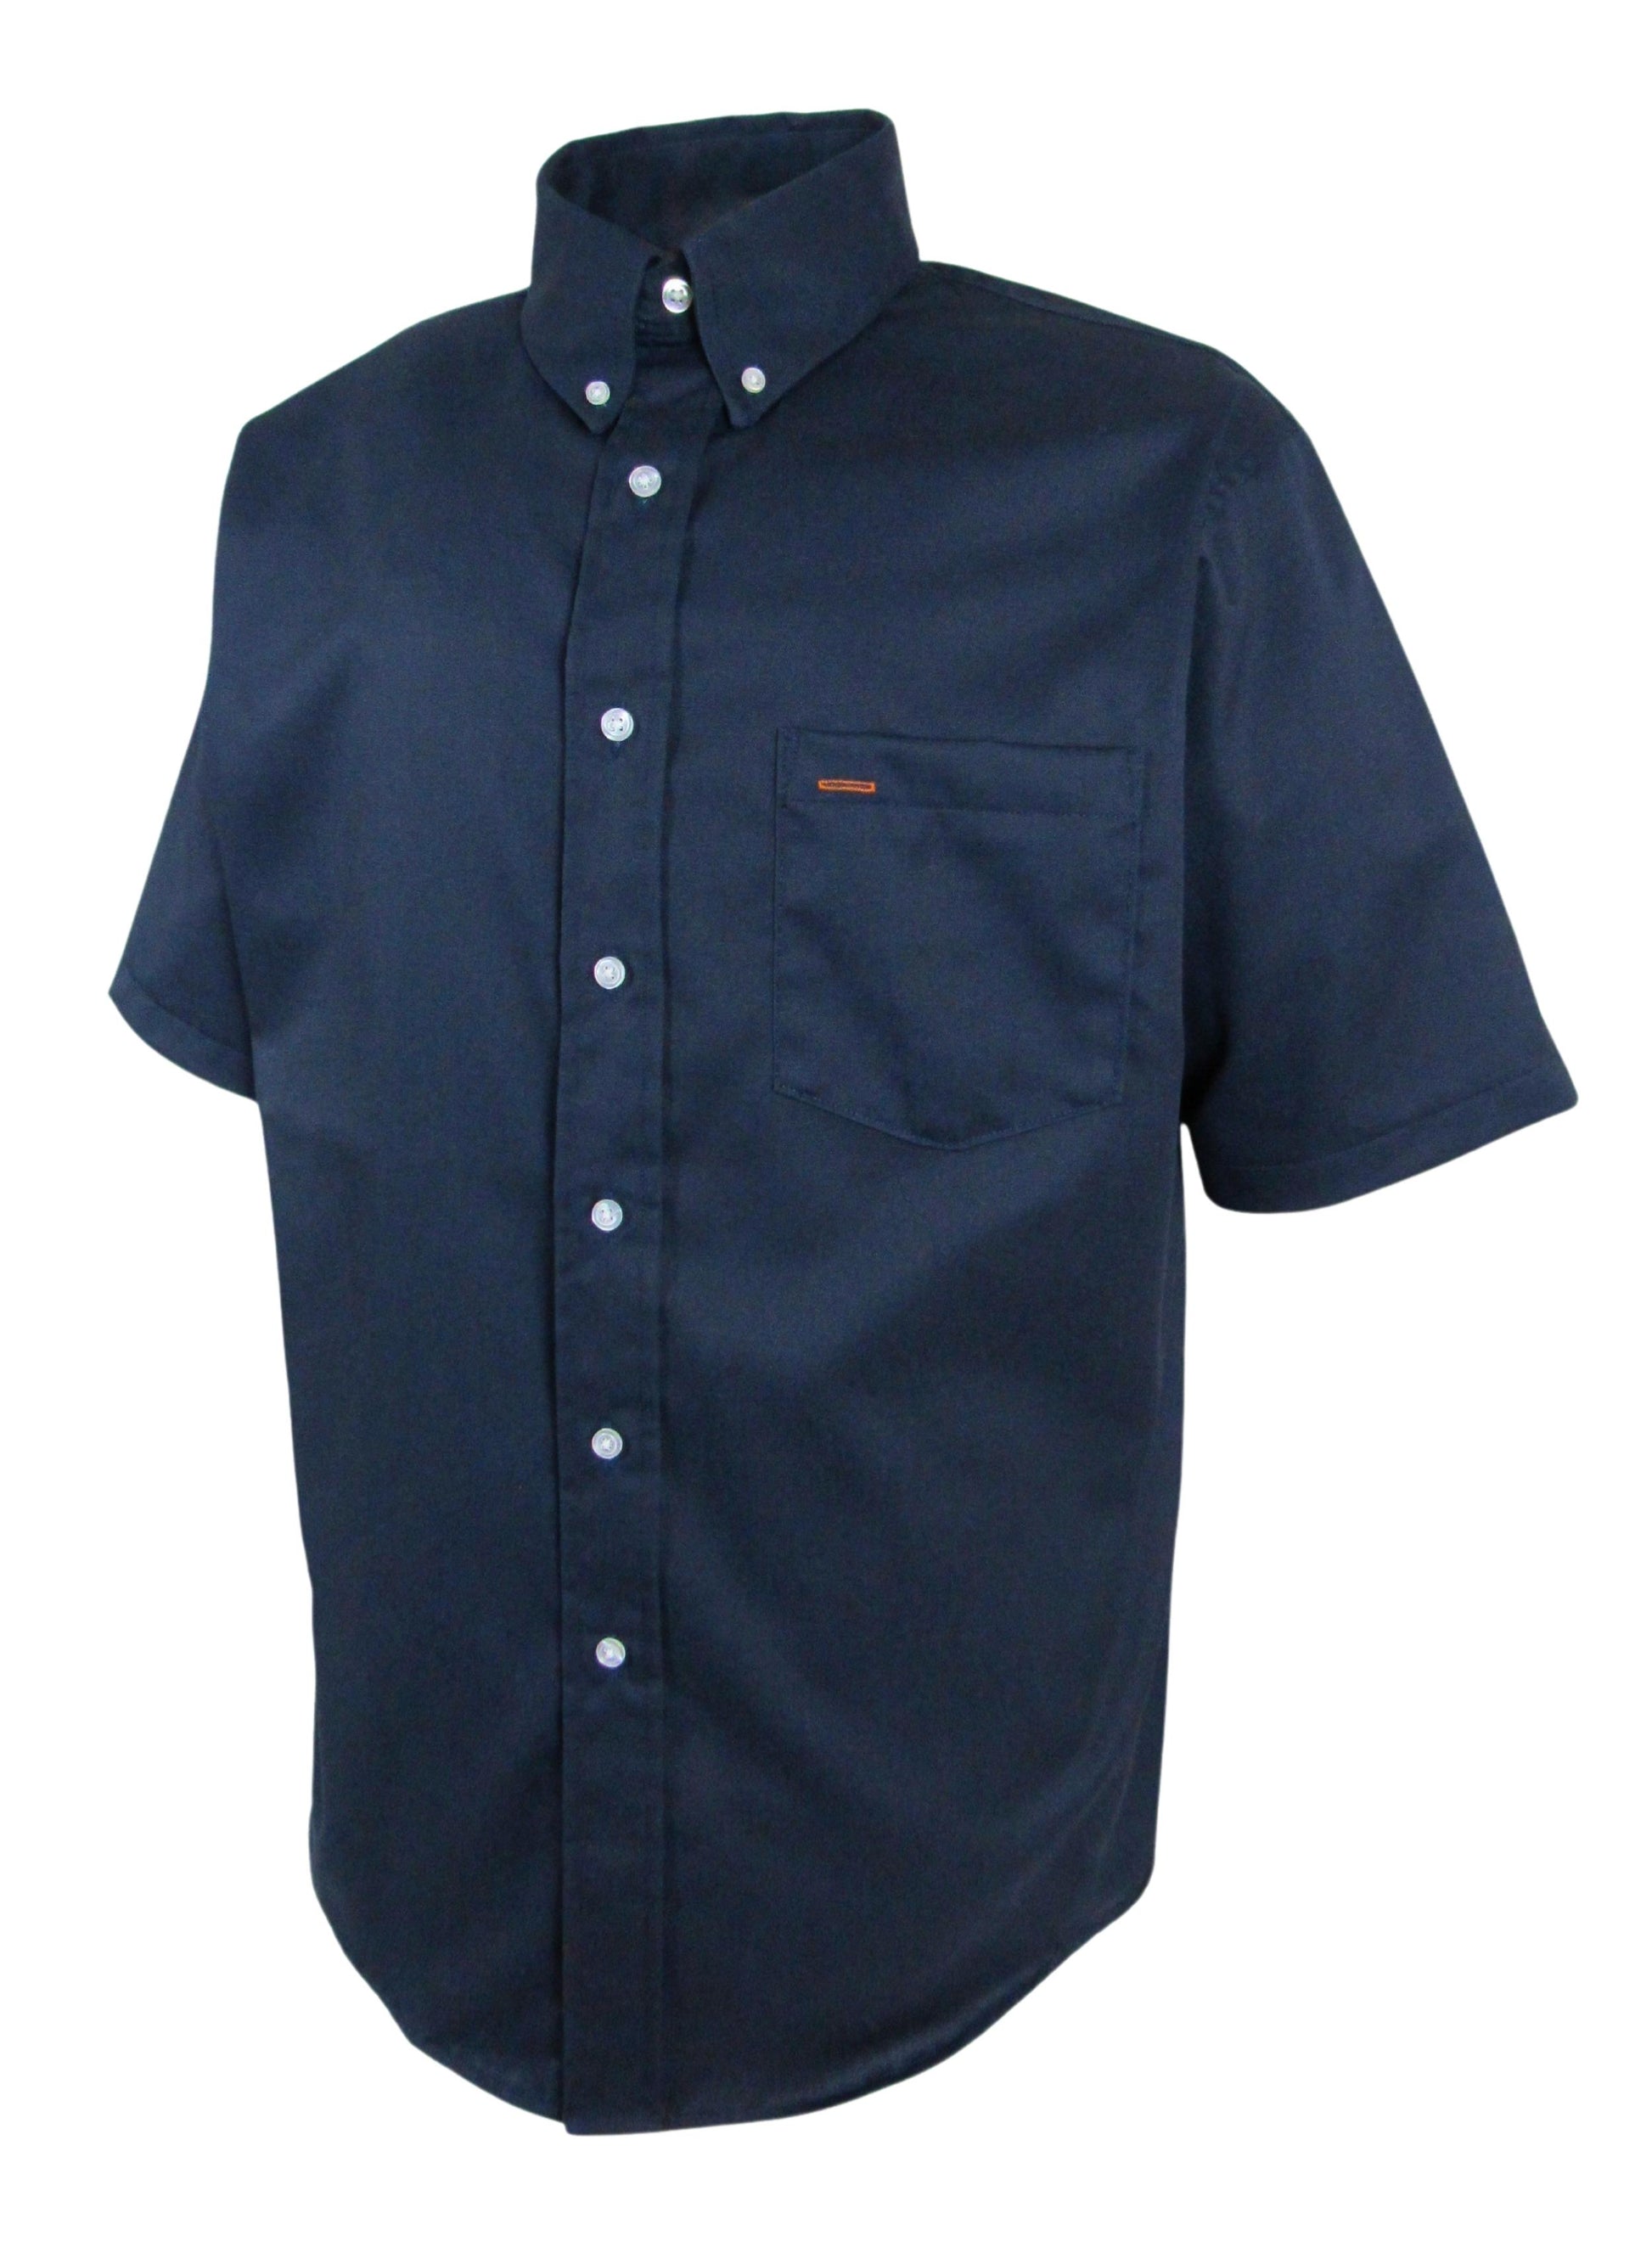 Ruddock Shirts Solid Navy short sleeve with buttons Made in USA